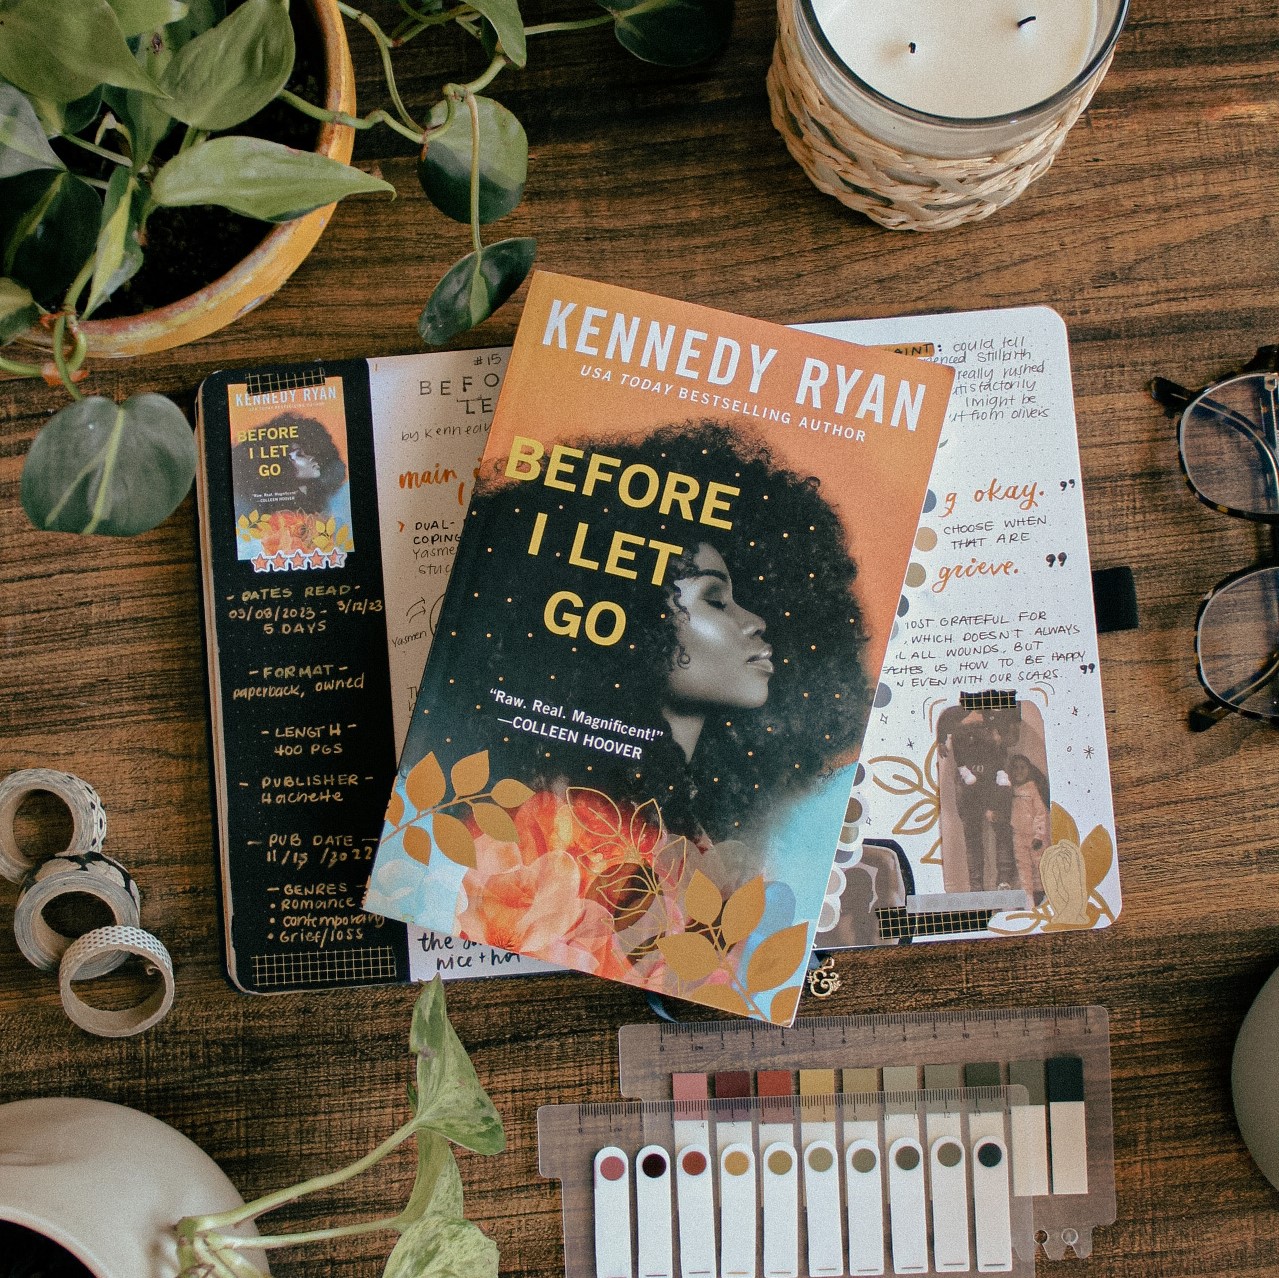 A flat-lay photo of the book Before I Let Go by Kennedy Ryan. The book is lying on a reading journal book review spread for the book. On the table around it are plants and stationery elements.